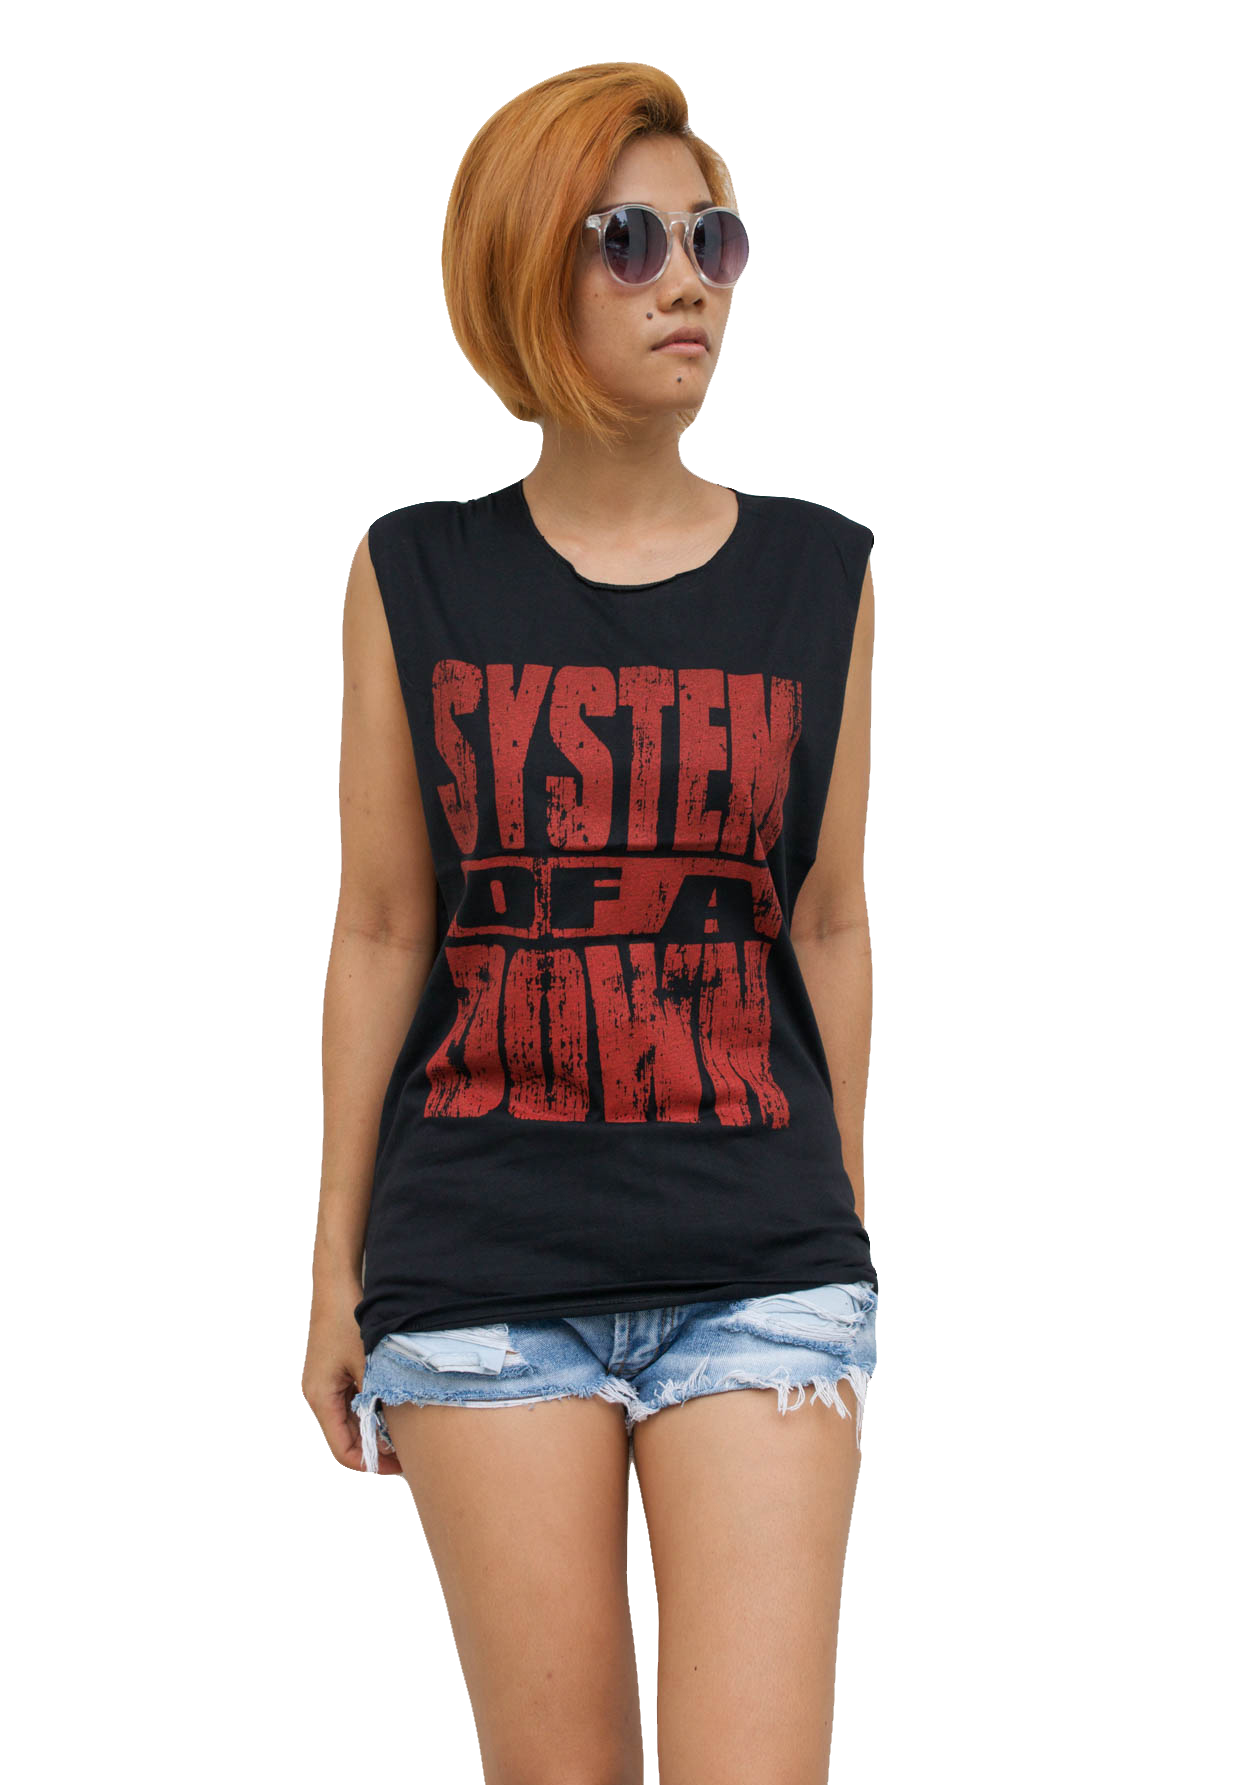 Ladies System Of A Down Vest Tank-Top Singlet Sleeveless T-Shirt